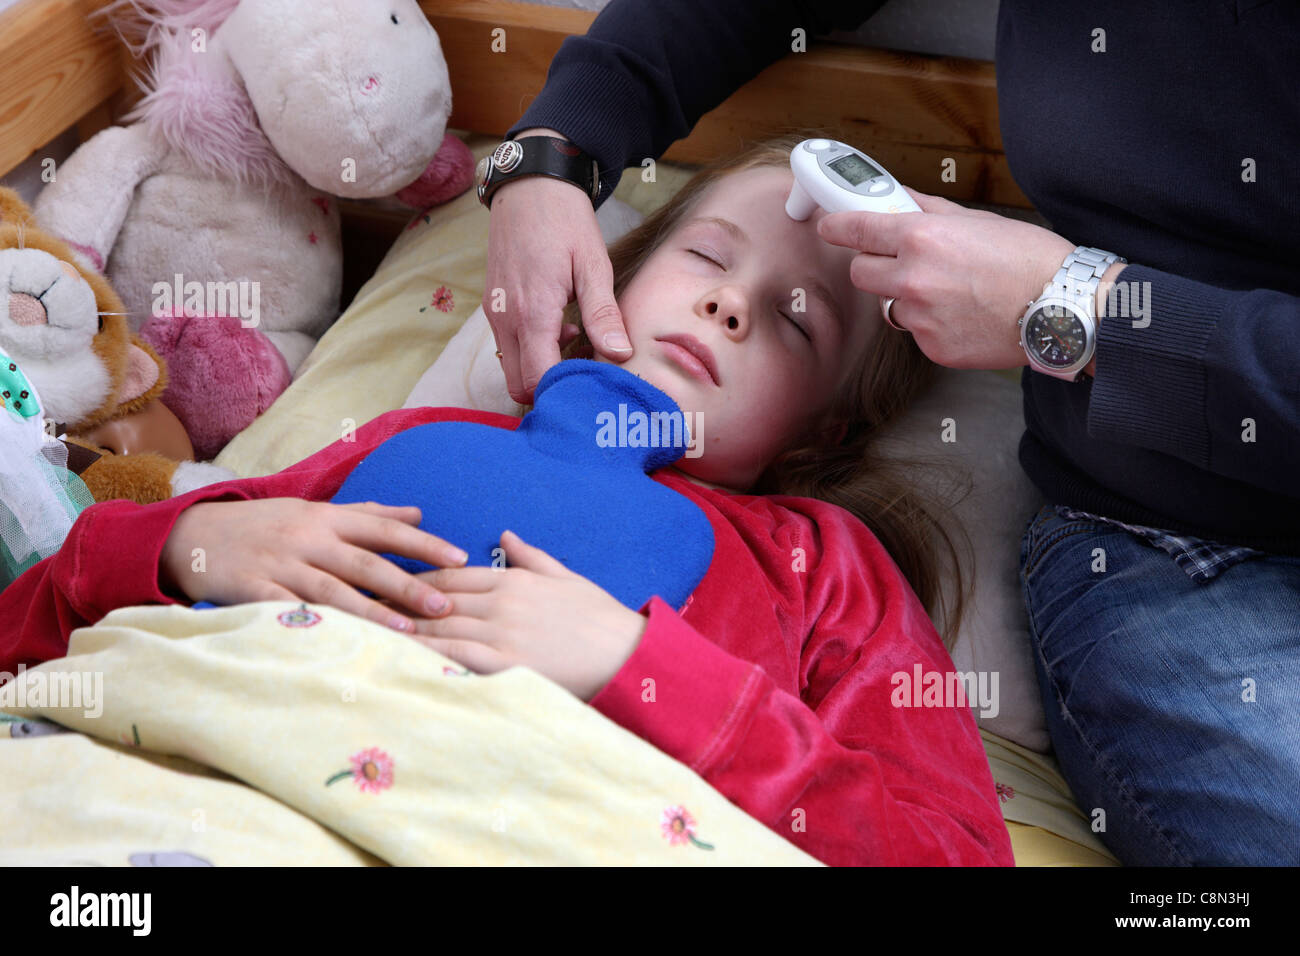 Young girl, 10 years old, is sick in bed, gets help and care from her mother. Stock Photo